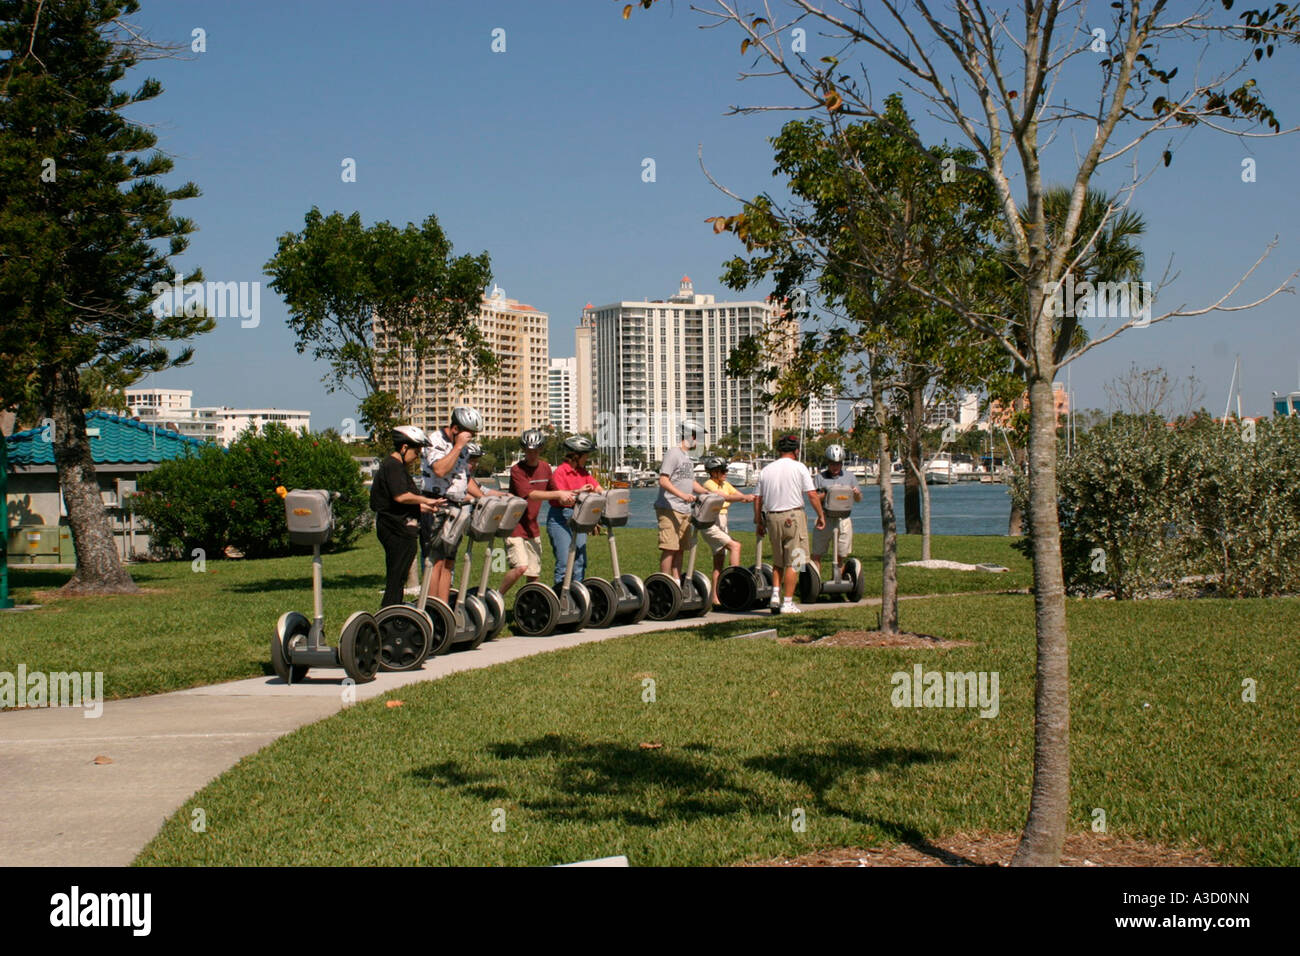 Segway scooters and personal transporter classes in Sarasota Florida USA Stock Photo